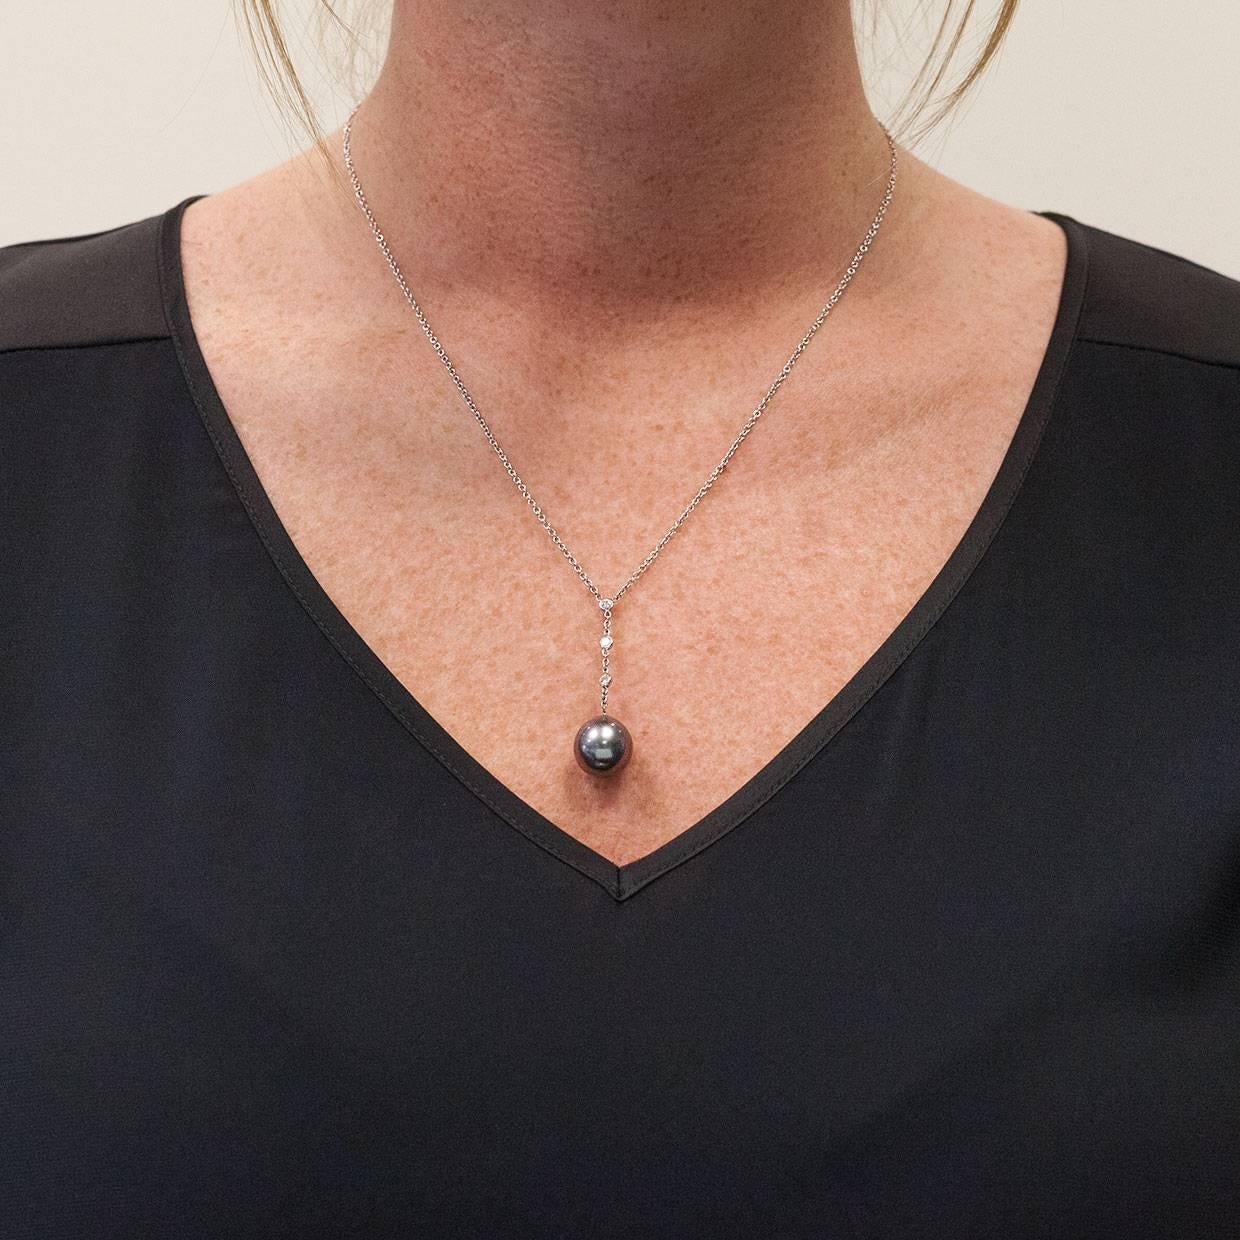 Women's White Gold Tahitian Pearl and Diamond Pendant Necklace